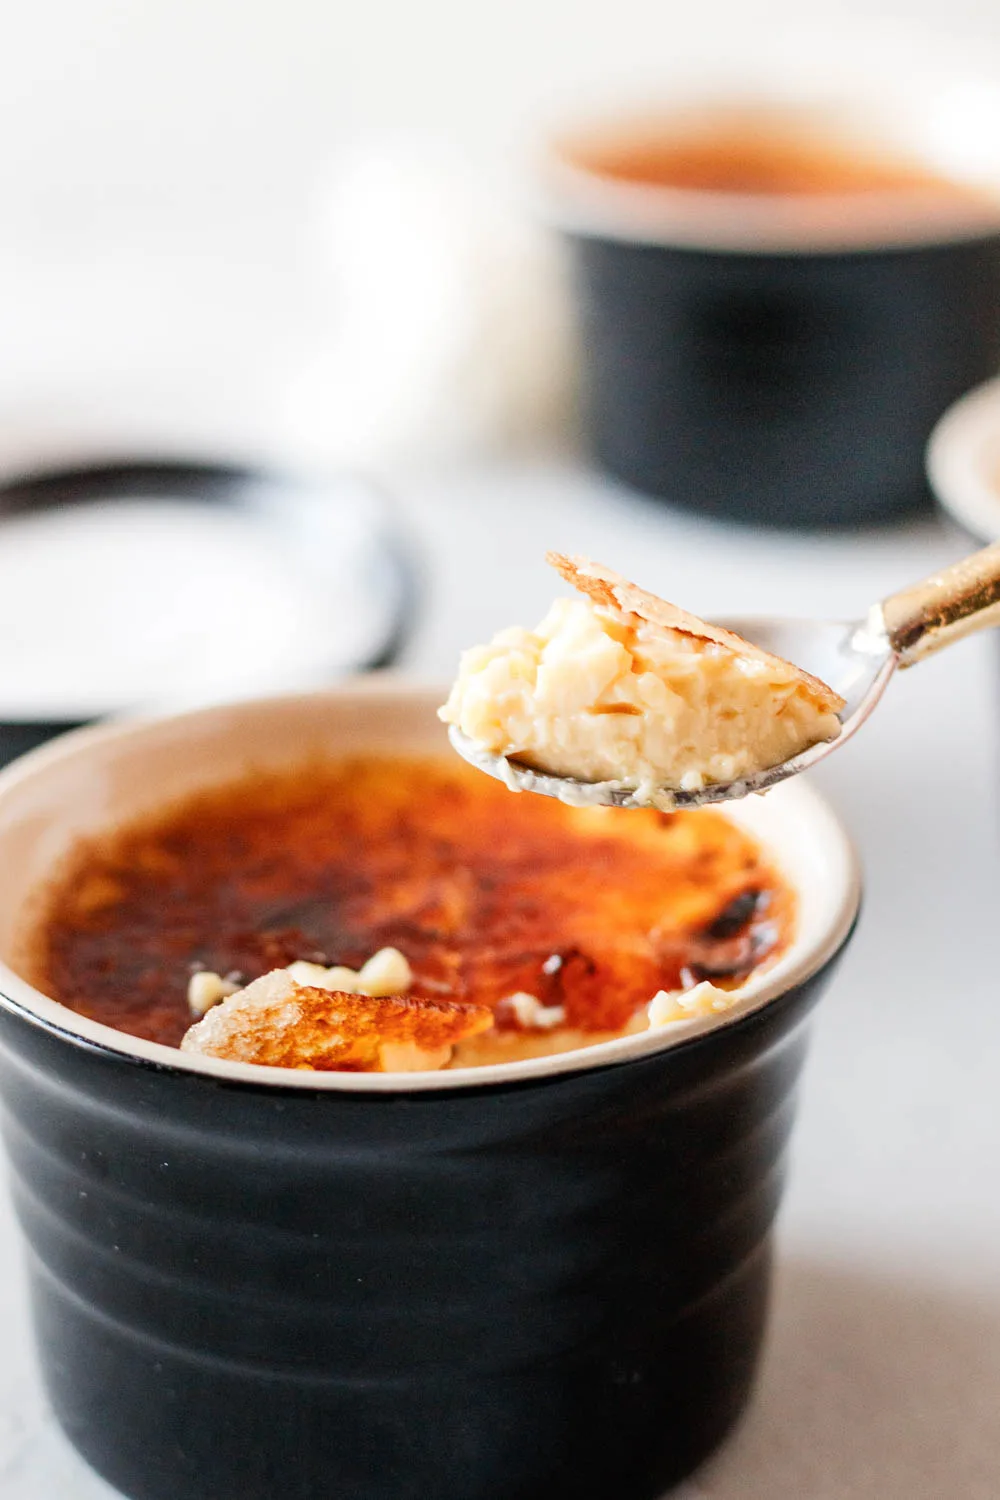 spoon lifting out of the creme brulee, ready to eat! 